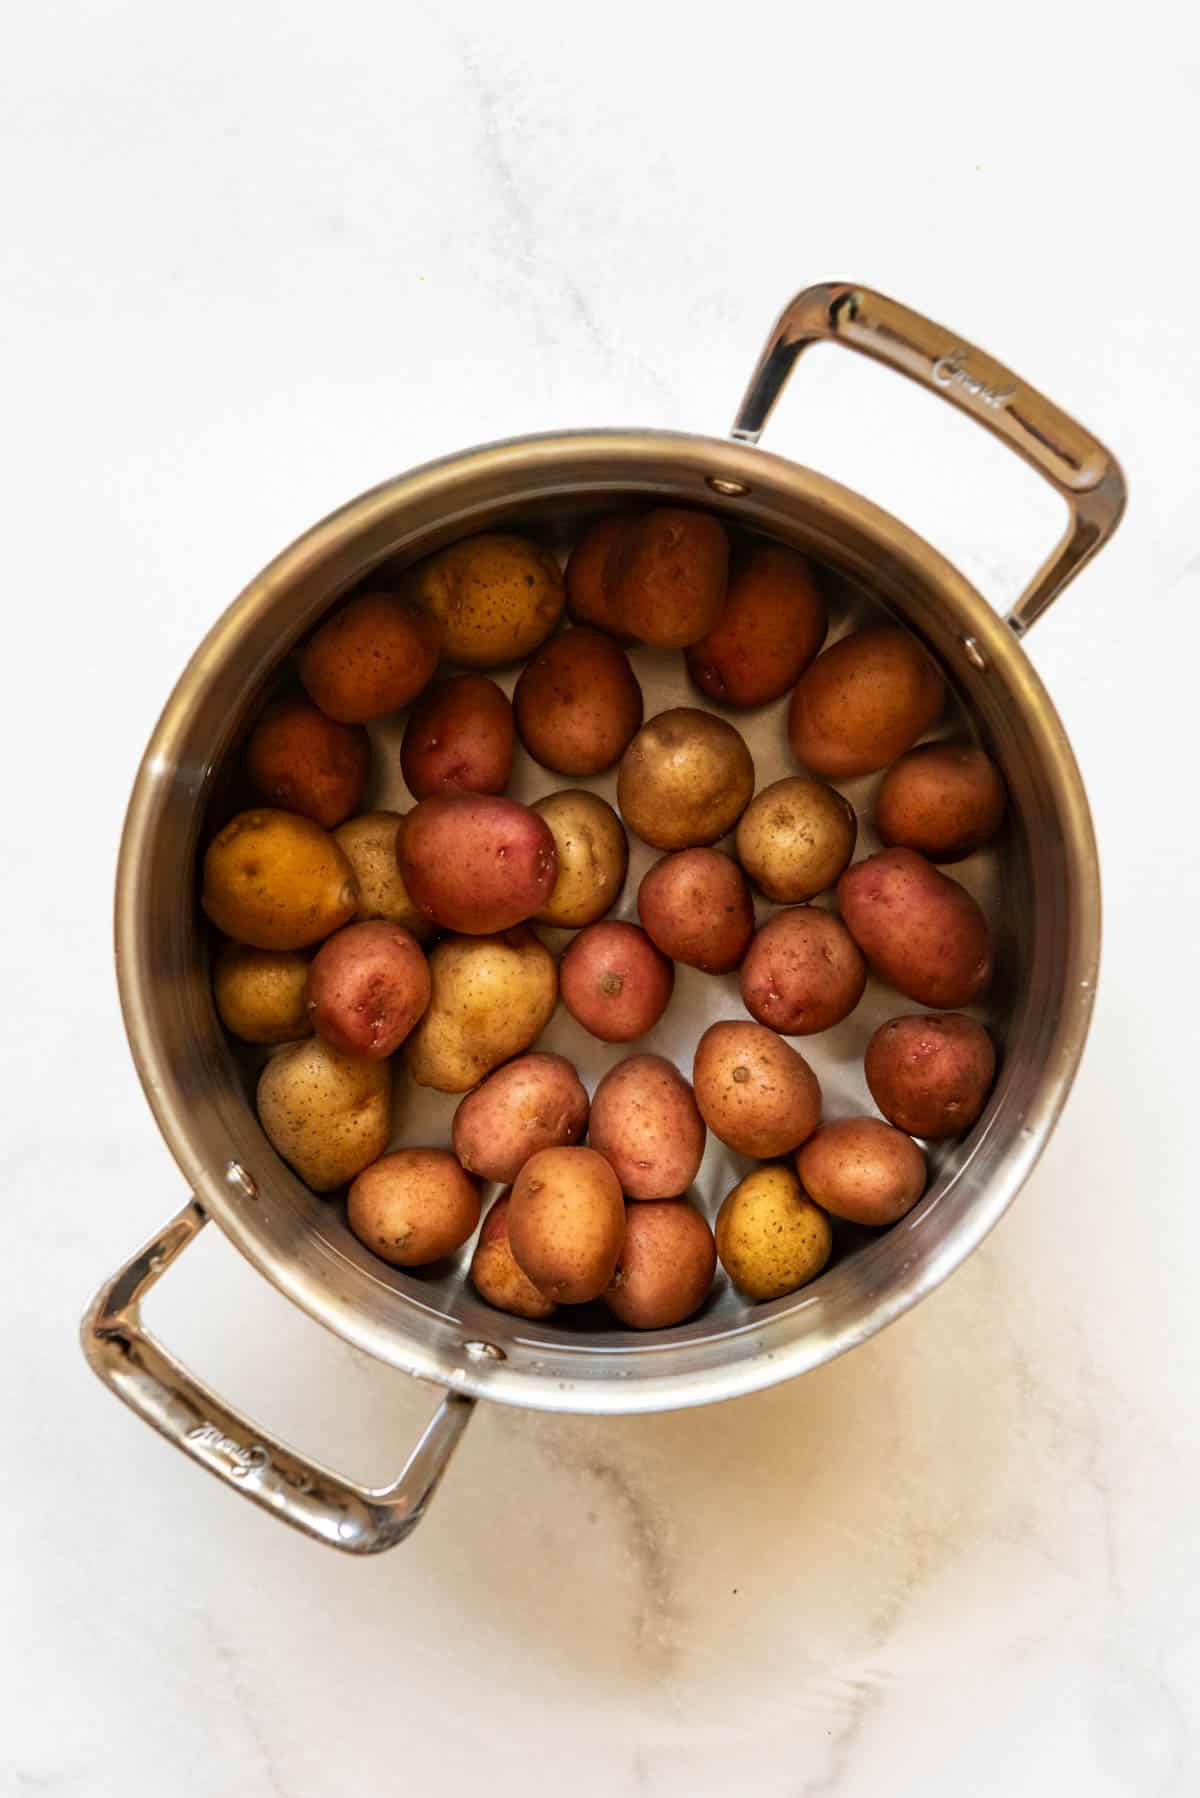 Small new potatoes in a large pot.